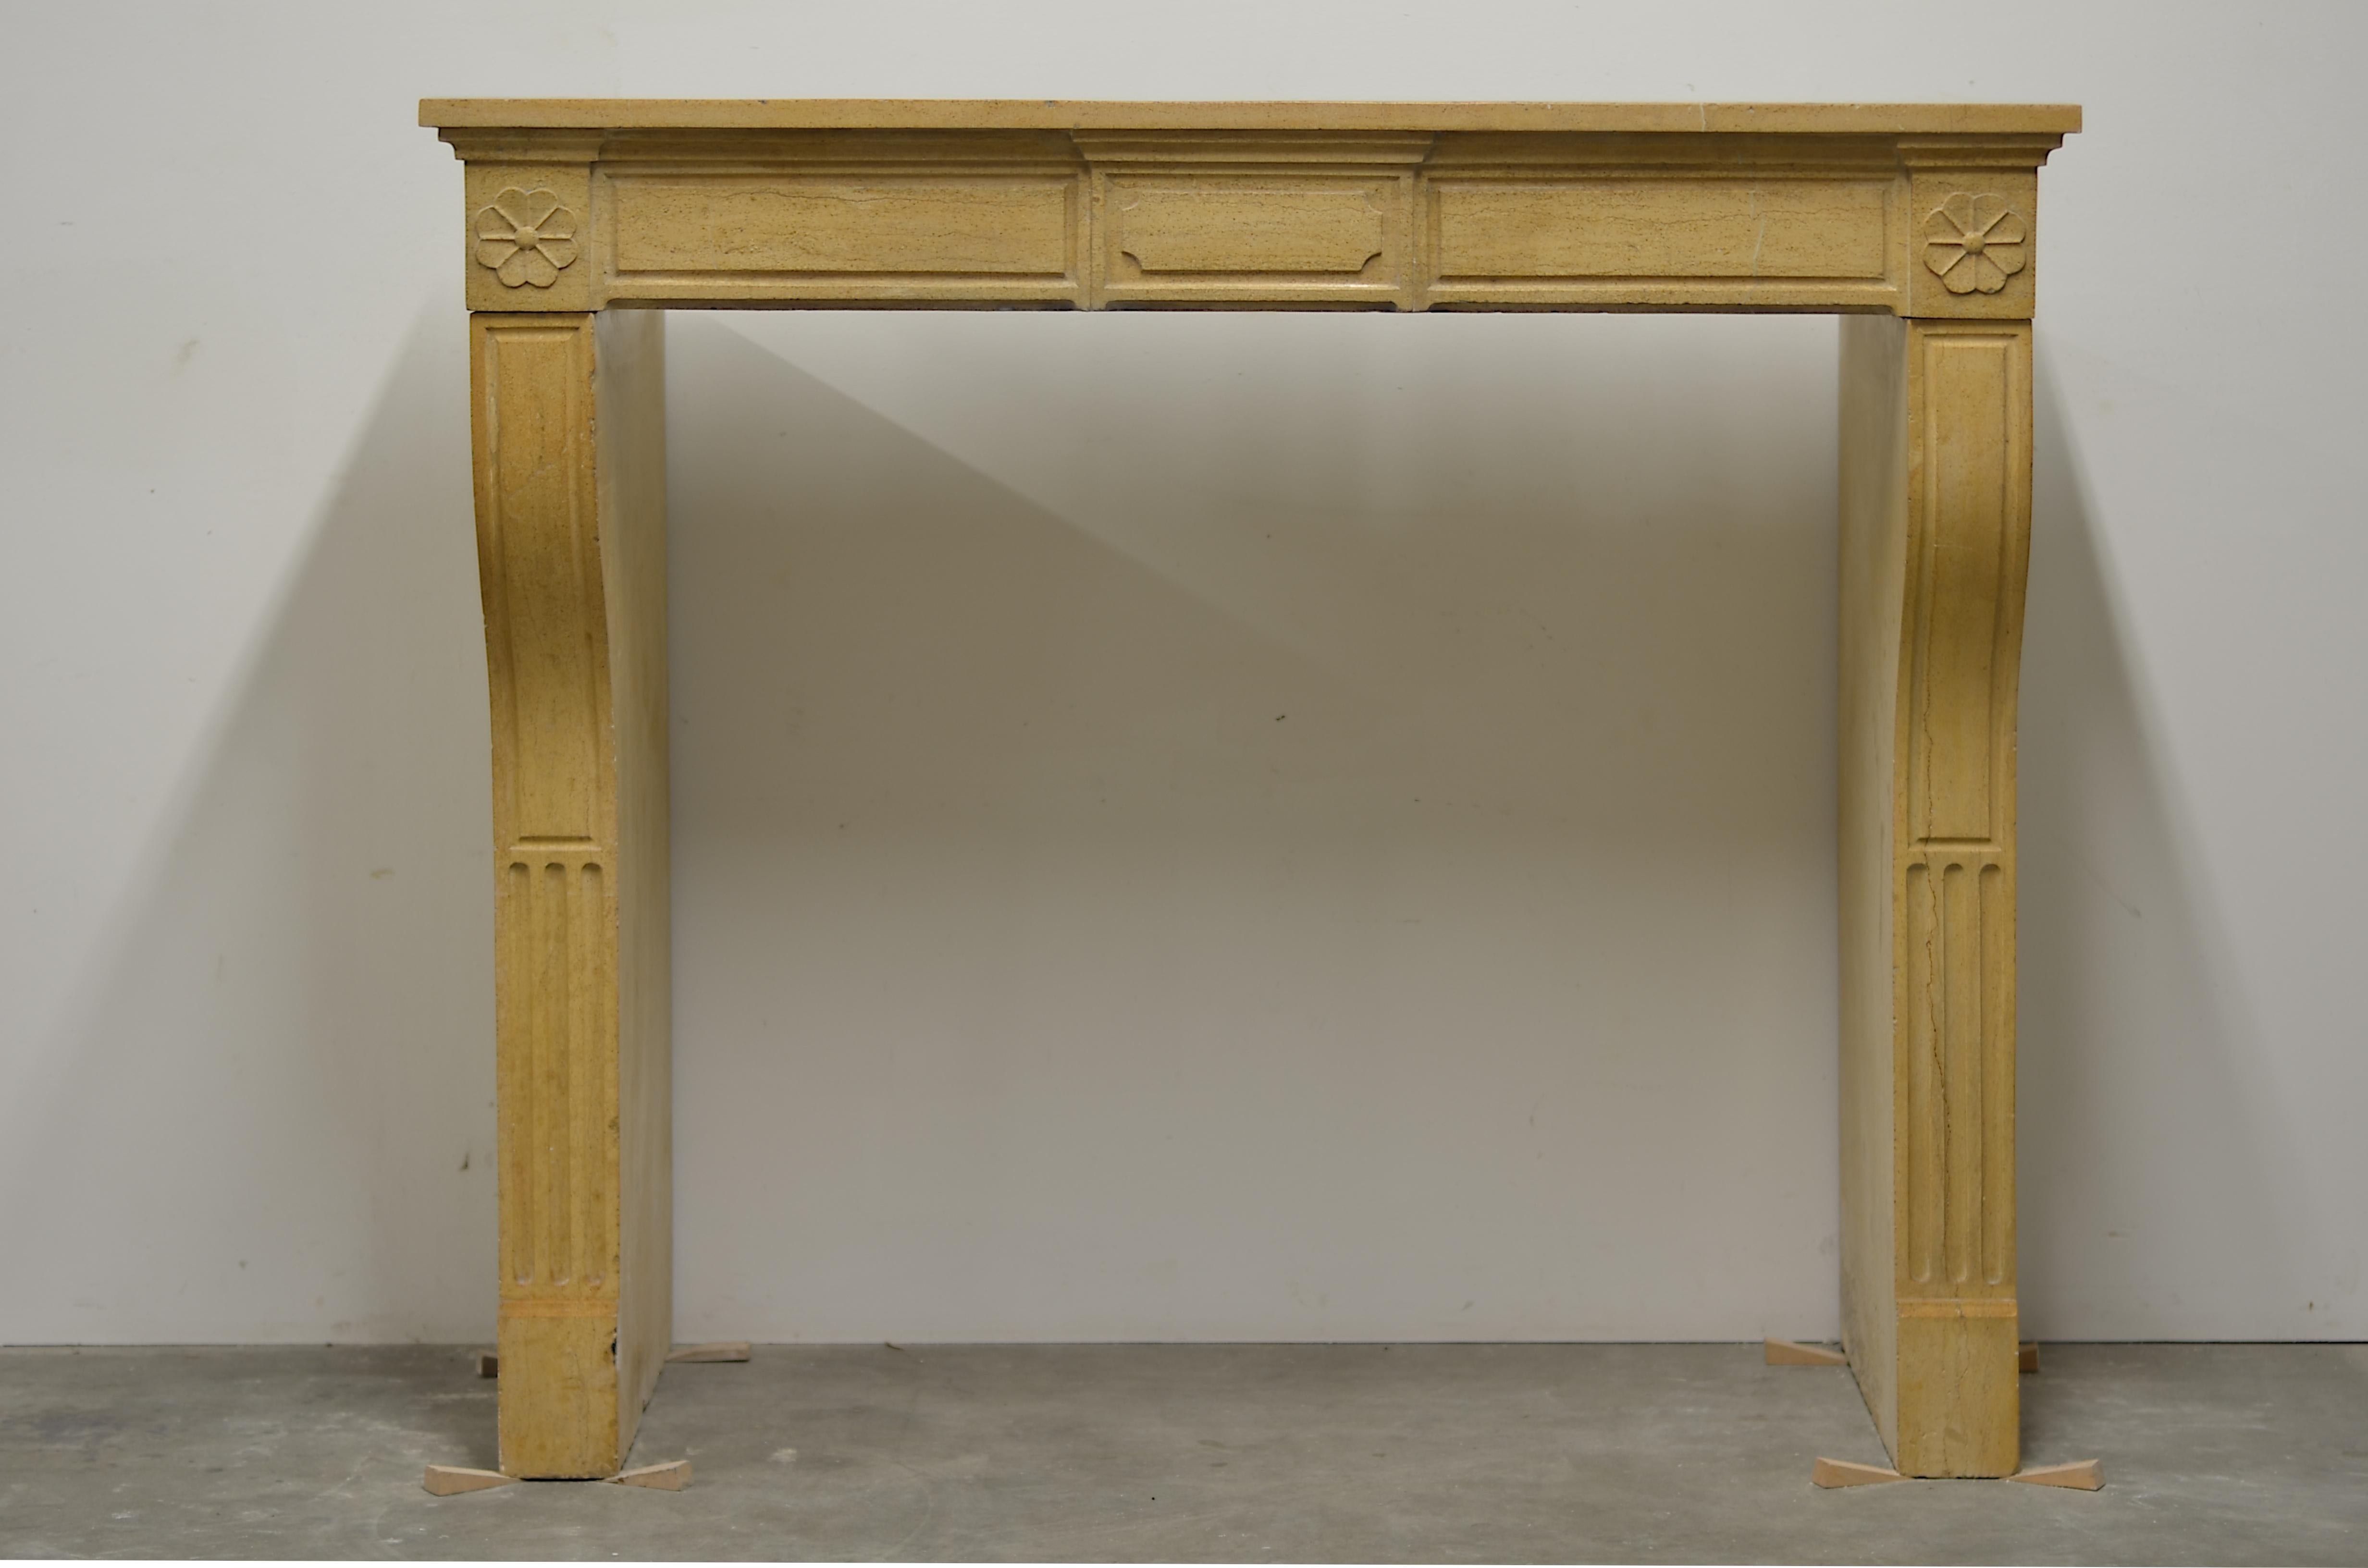 19th century French Louis XVI style fireplace mantel in nice warm limestone.
This nice and clean looking paneled Louis XVI is adorned with two lovely stylish flowers on both sides of the frieze.

It is in great overall condition, lovely